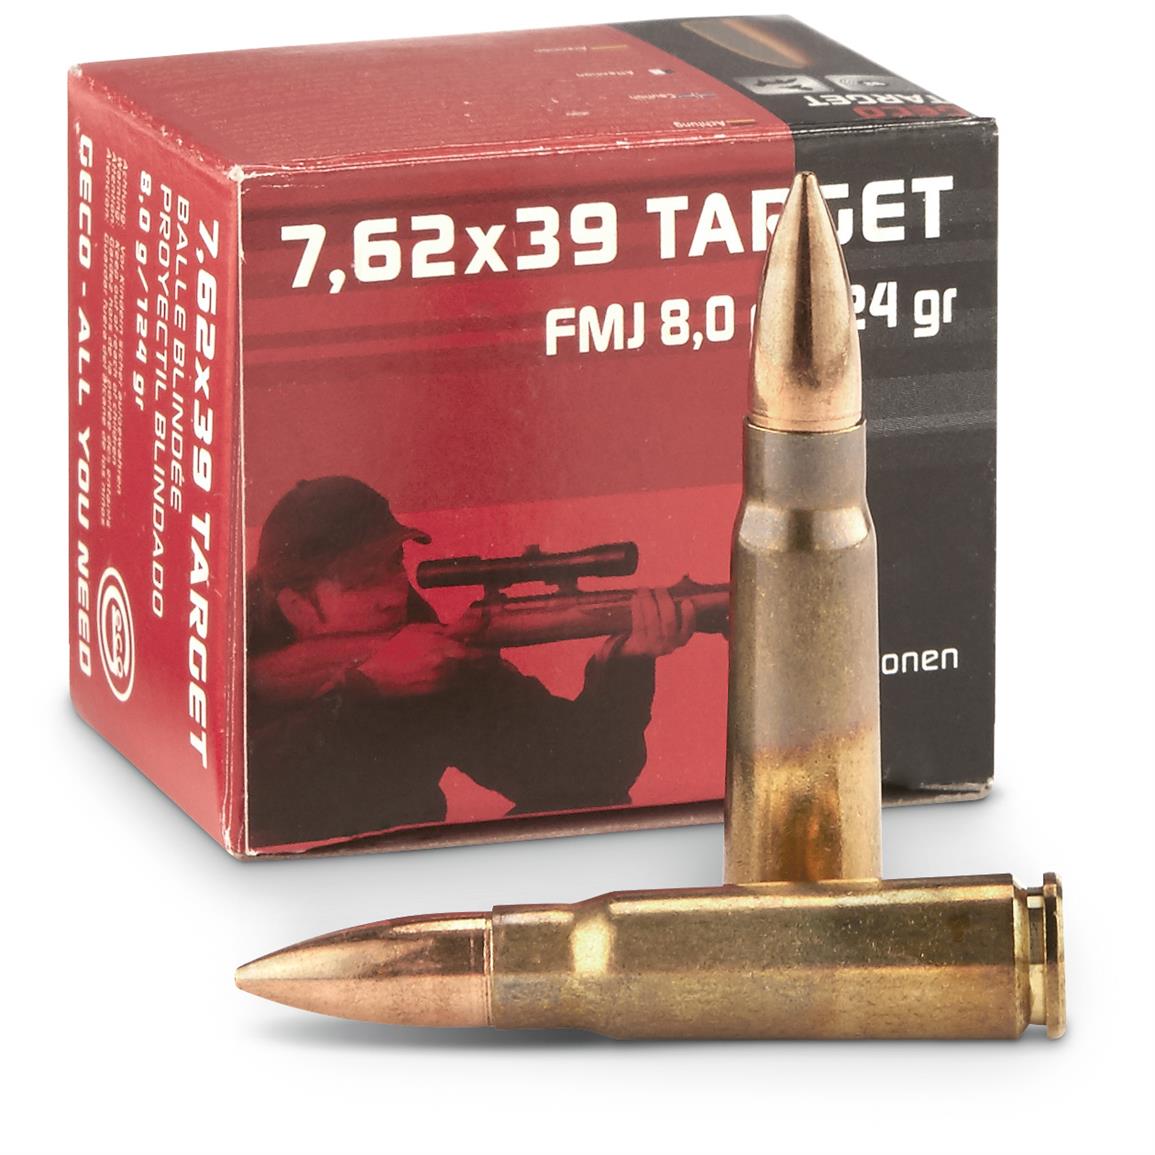 Geco 7 62x39mm Fmj 124 Grain 1 000 Rounds 651380 7 62x39mm Ammo At Sportsman S Guide